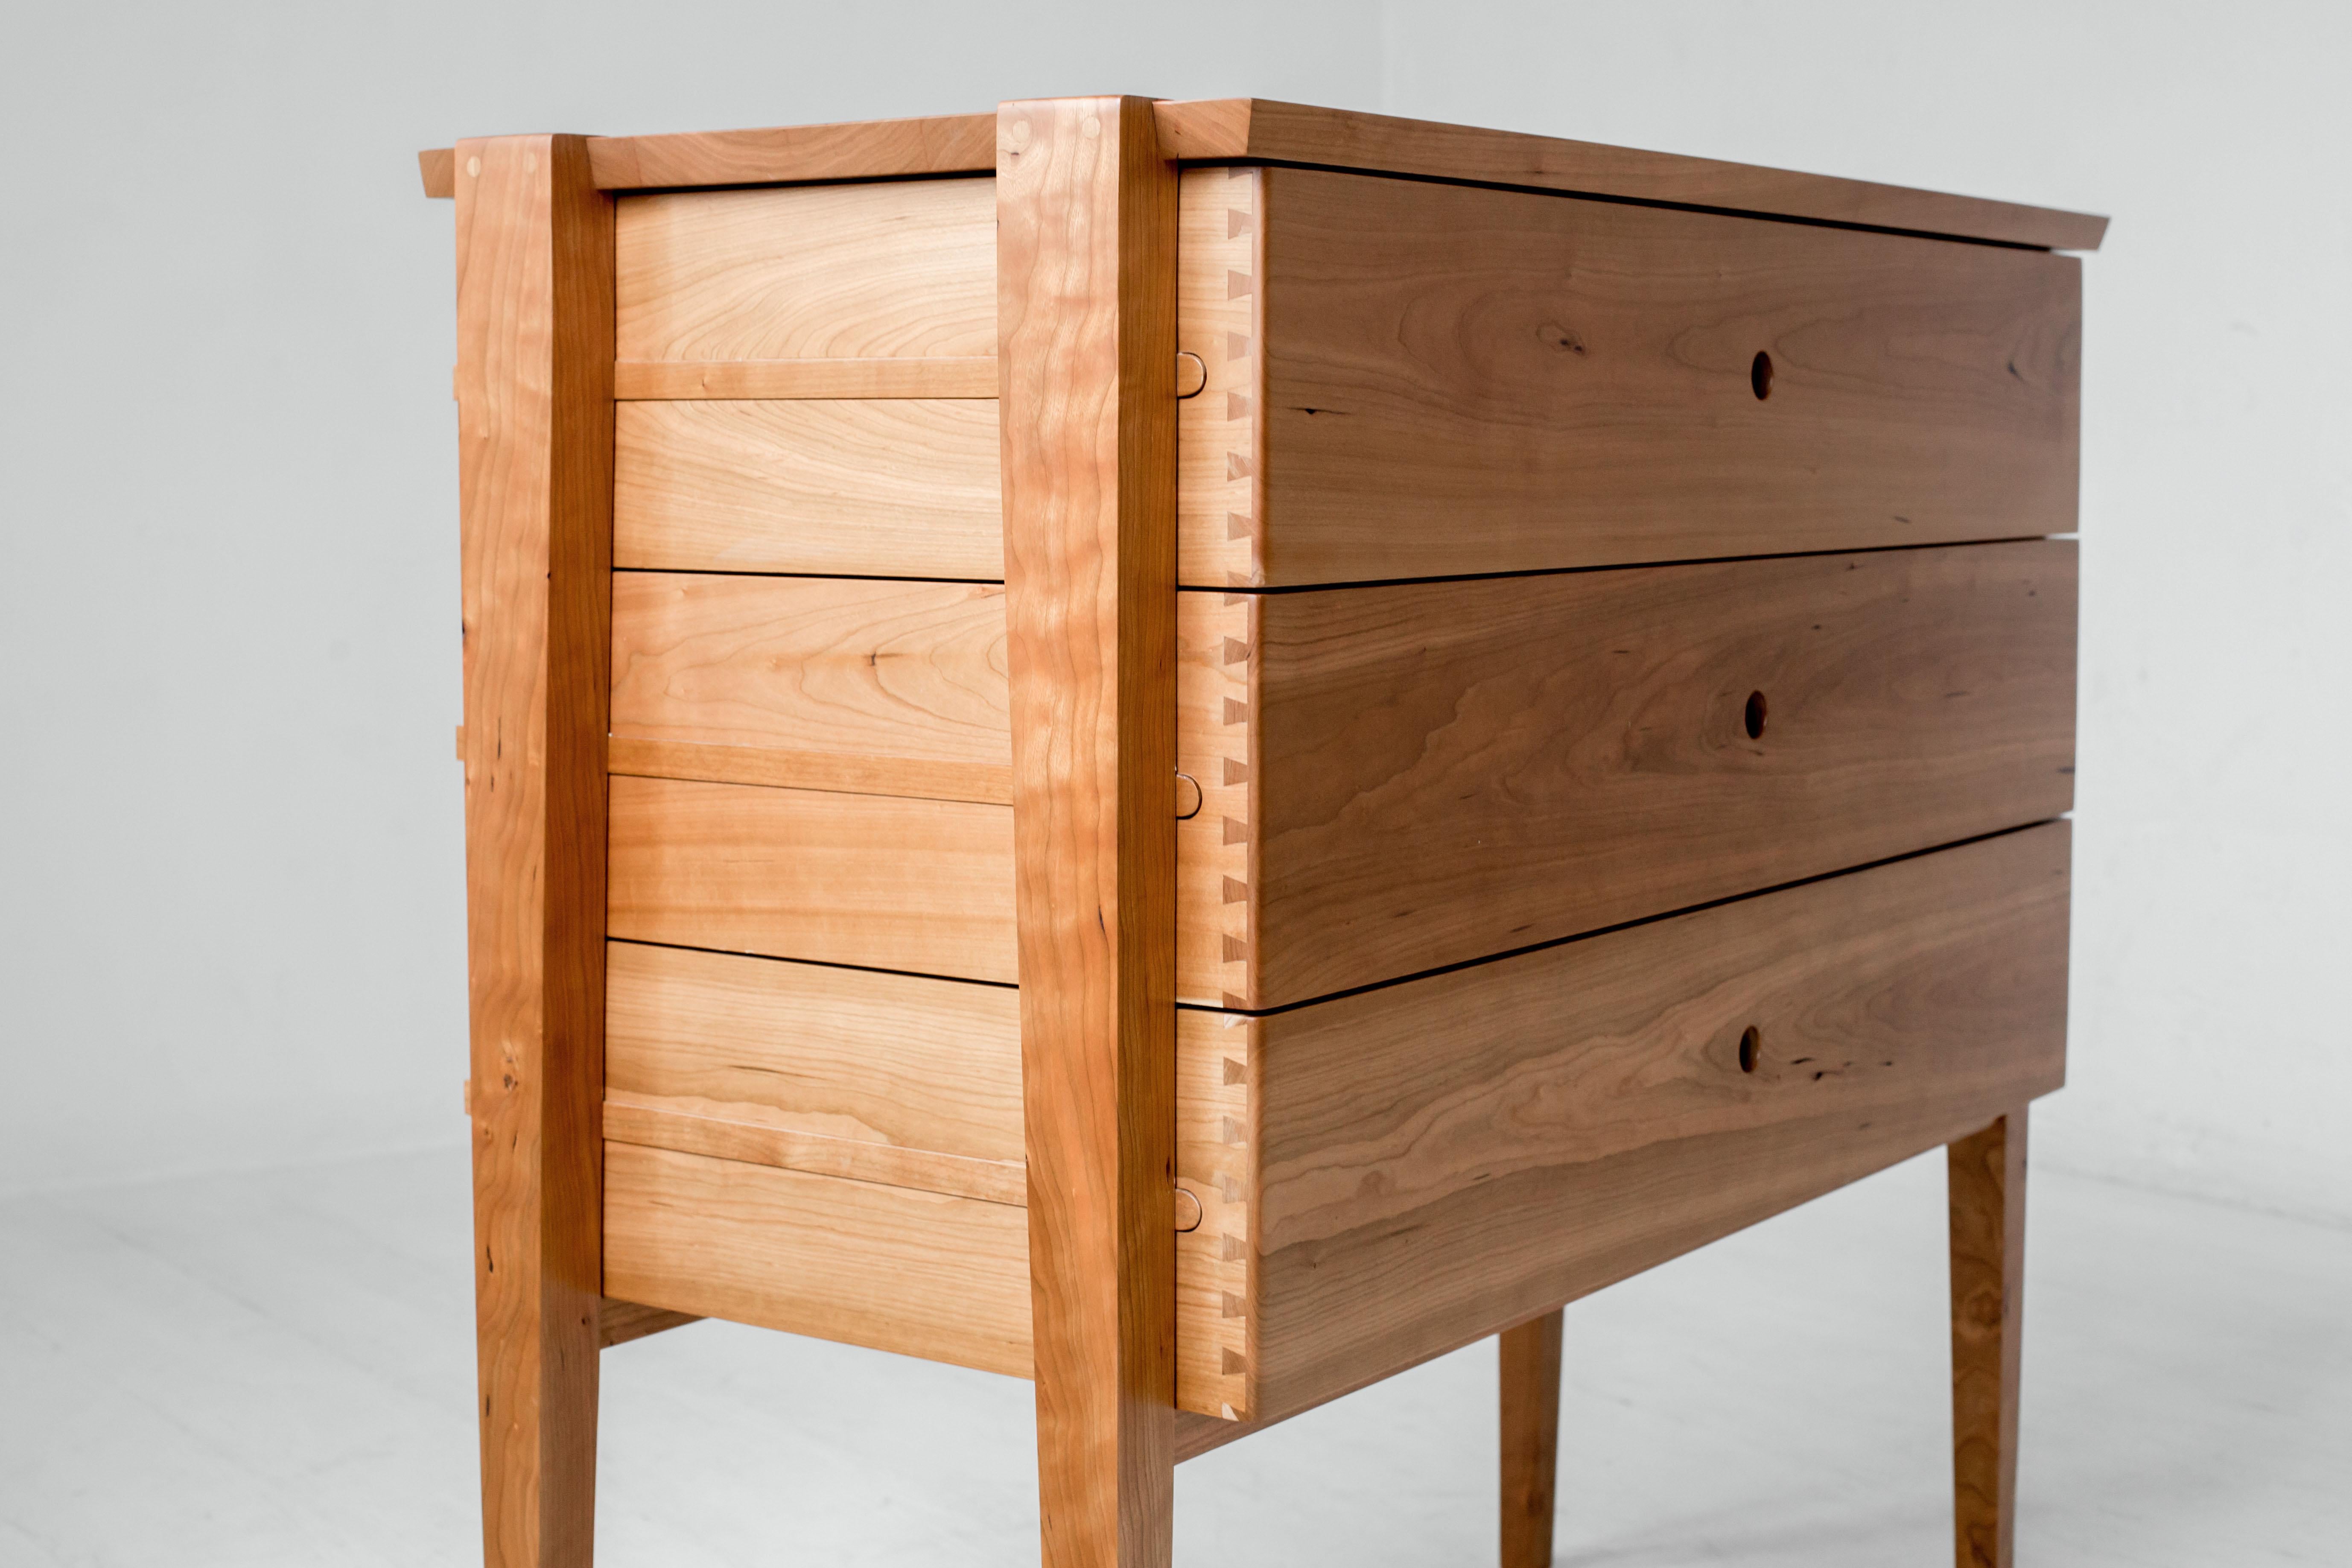 Simplicity and beauty intersect in this modern interpretation of a tradition design. Our Oslo cherry dresser features three deep dovetailed drawers nestled in an open frame. The drawers slide smoothly on waxed wood rails, revealing the mechanism at